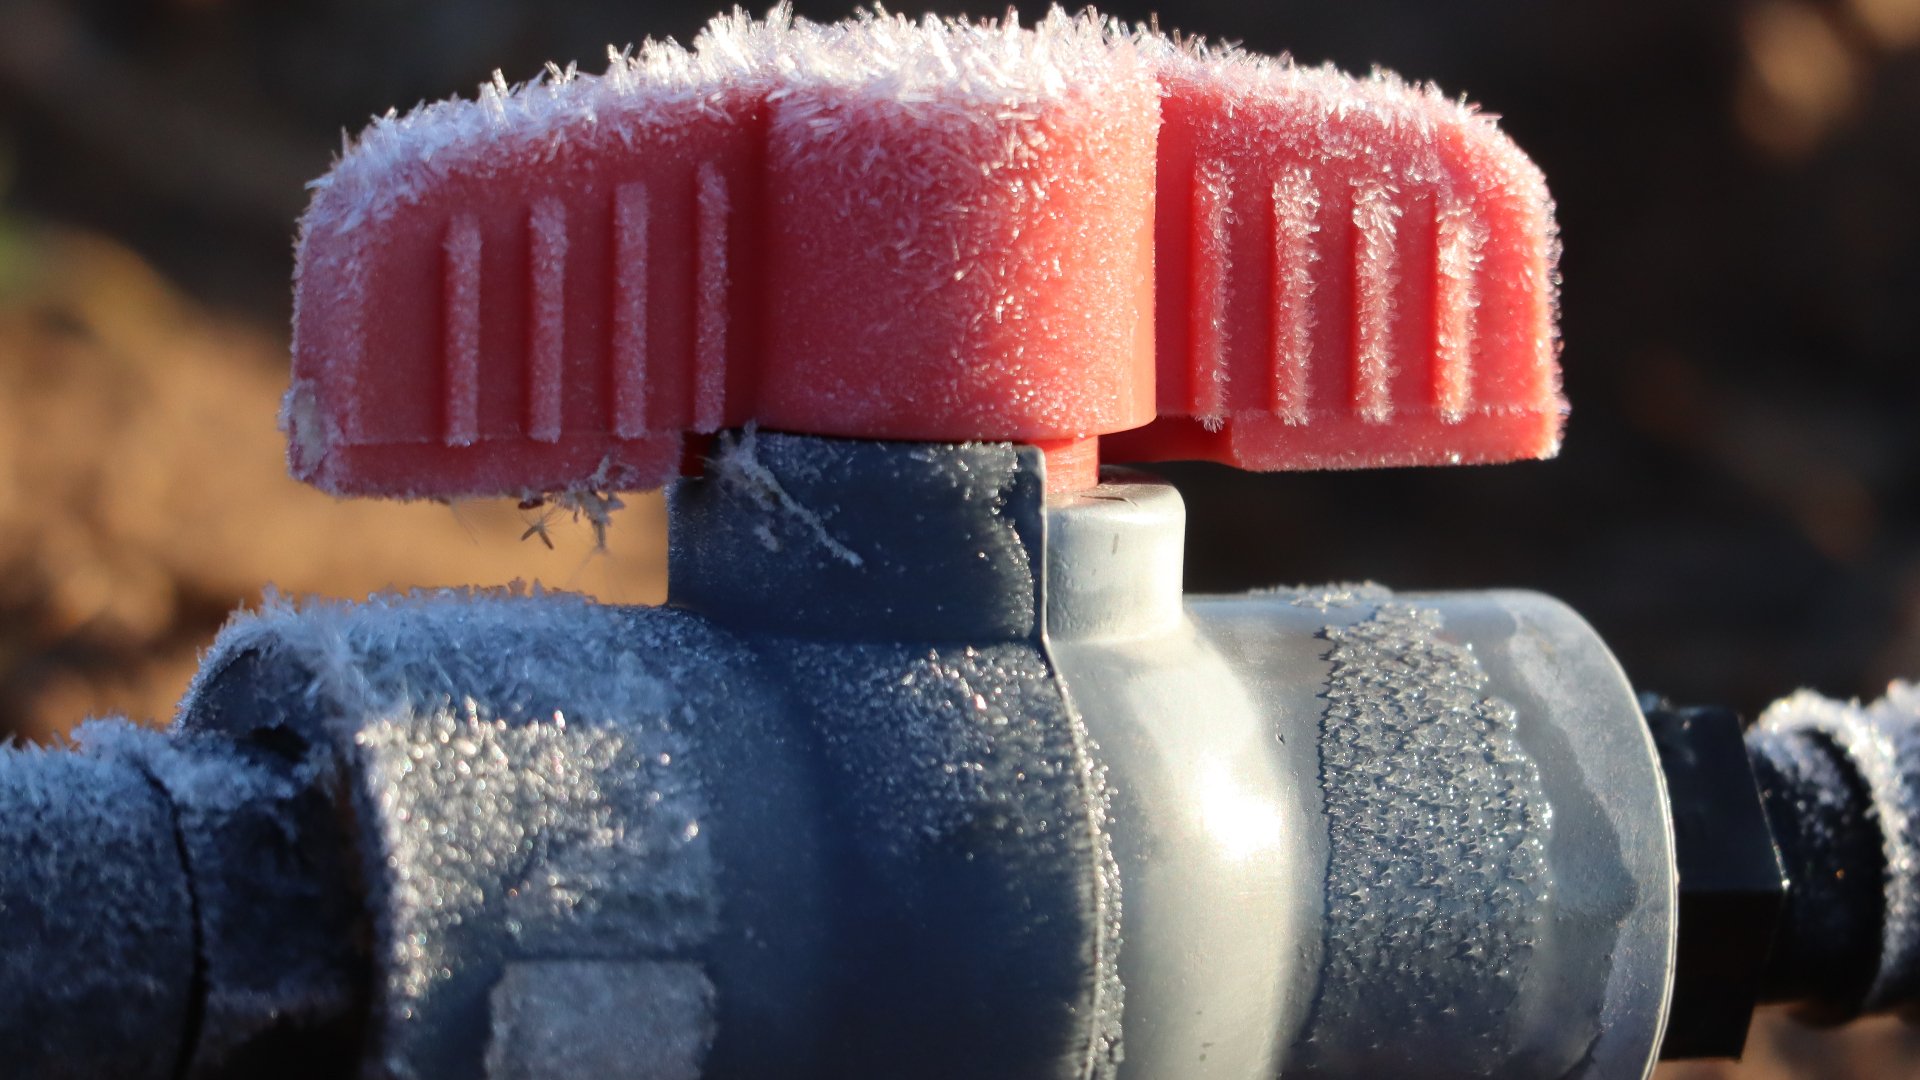 A irrigation system valve frozen over in the dead of winter in Nicollet, MN.